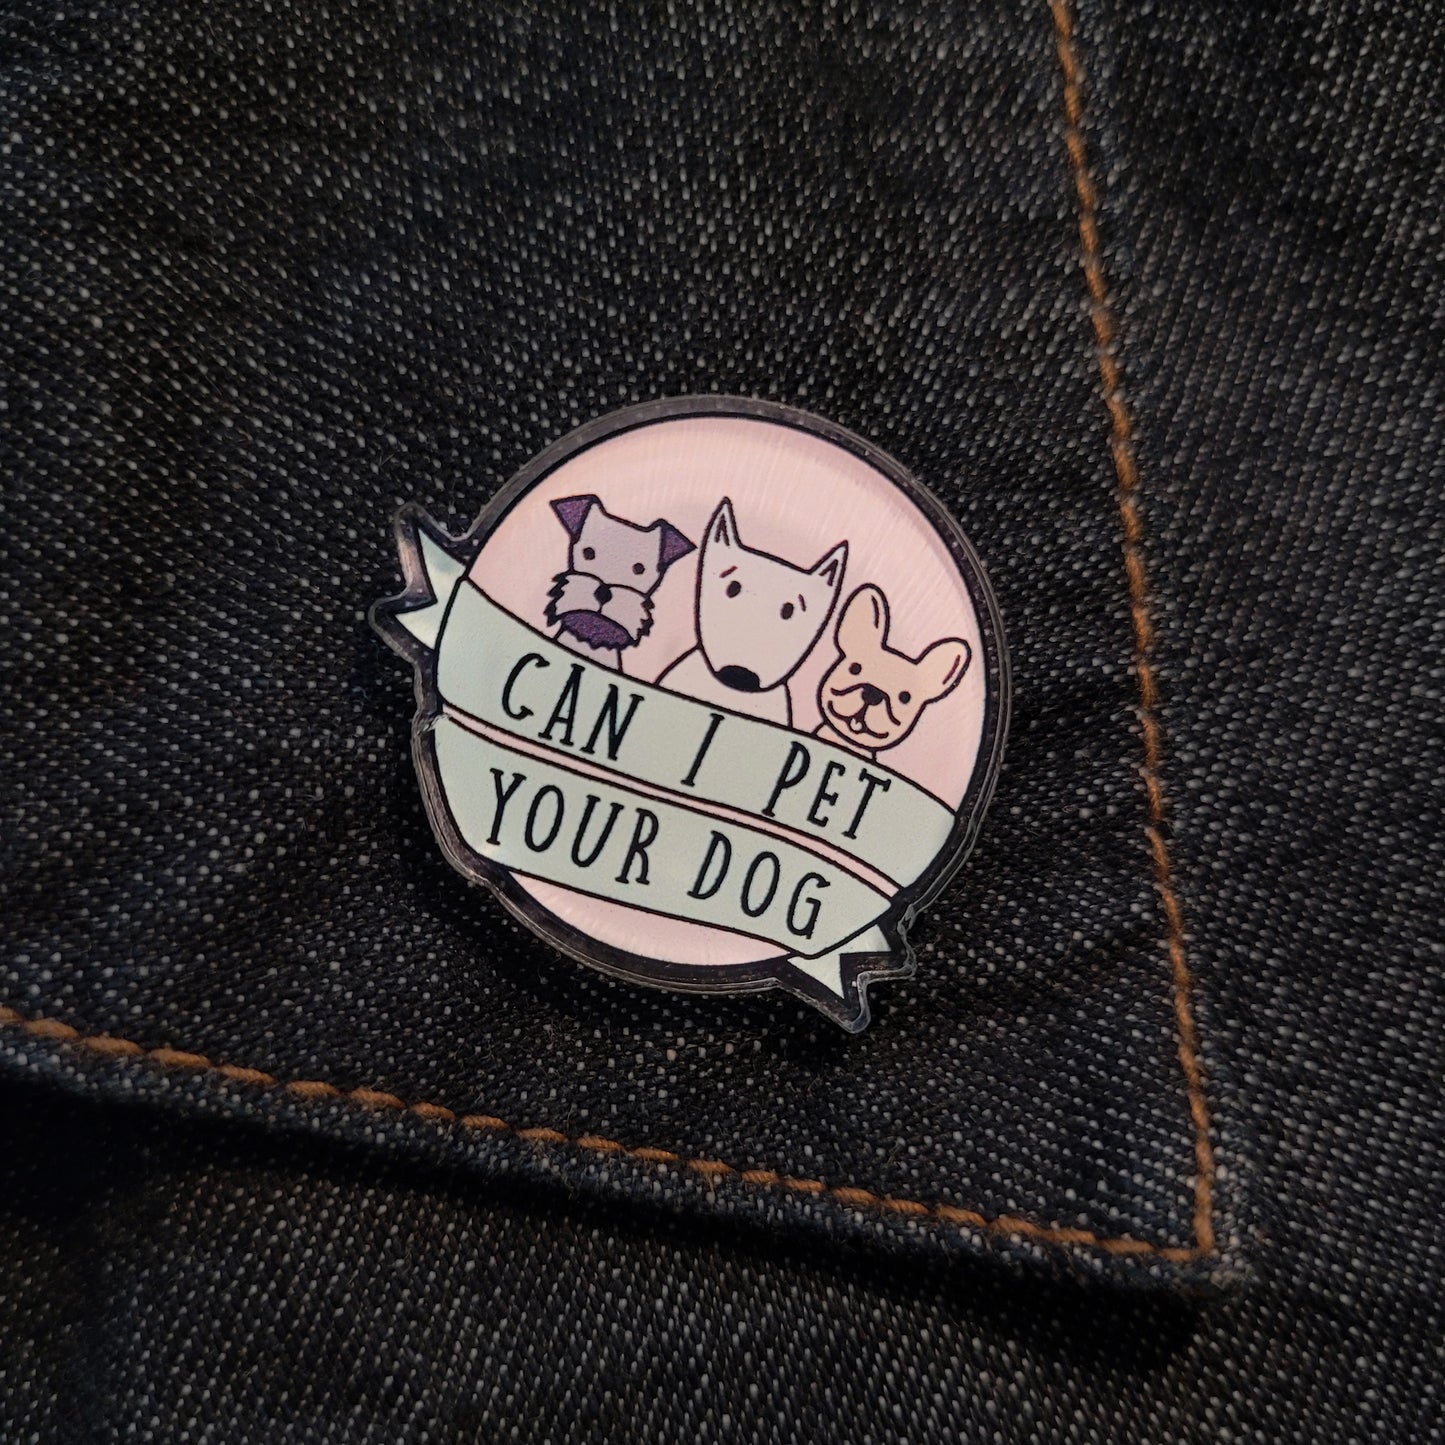 "Can I Pet Your Dog" Pin